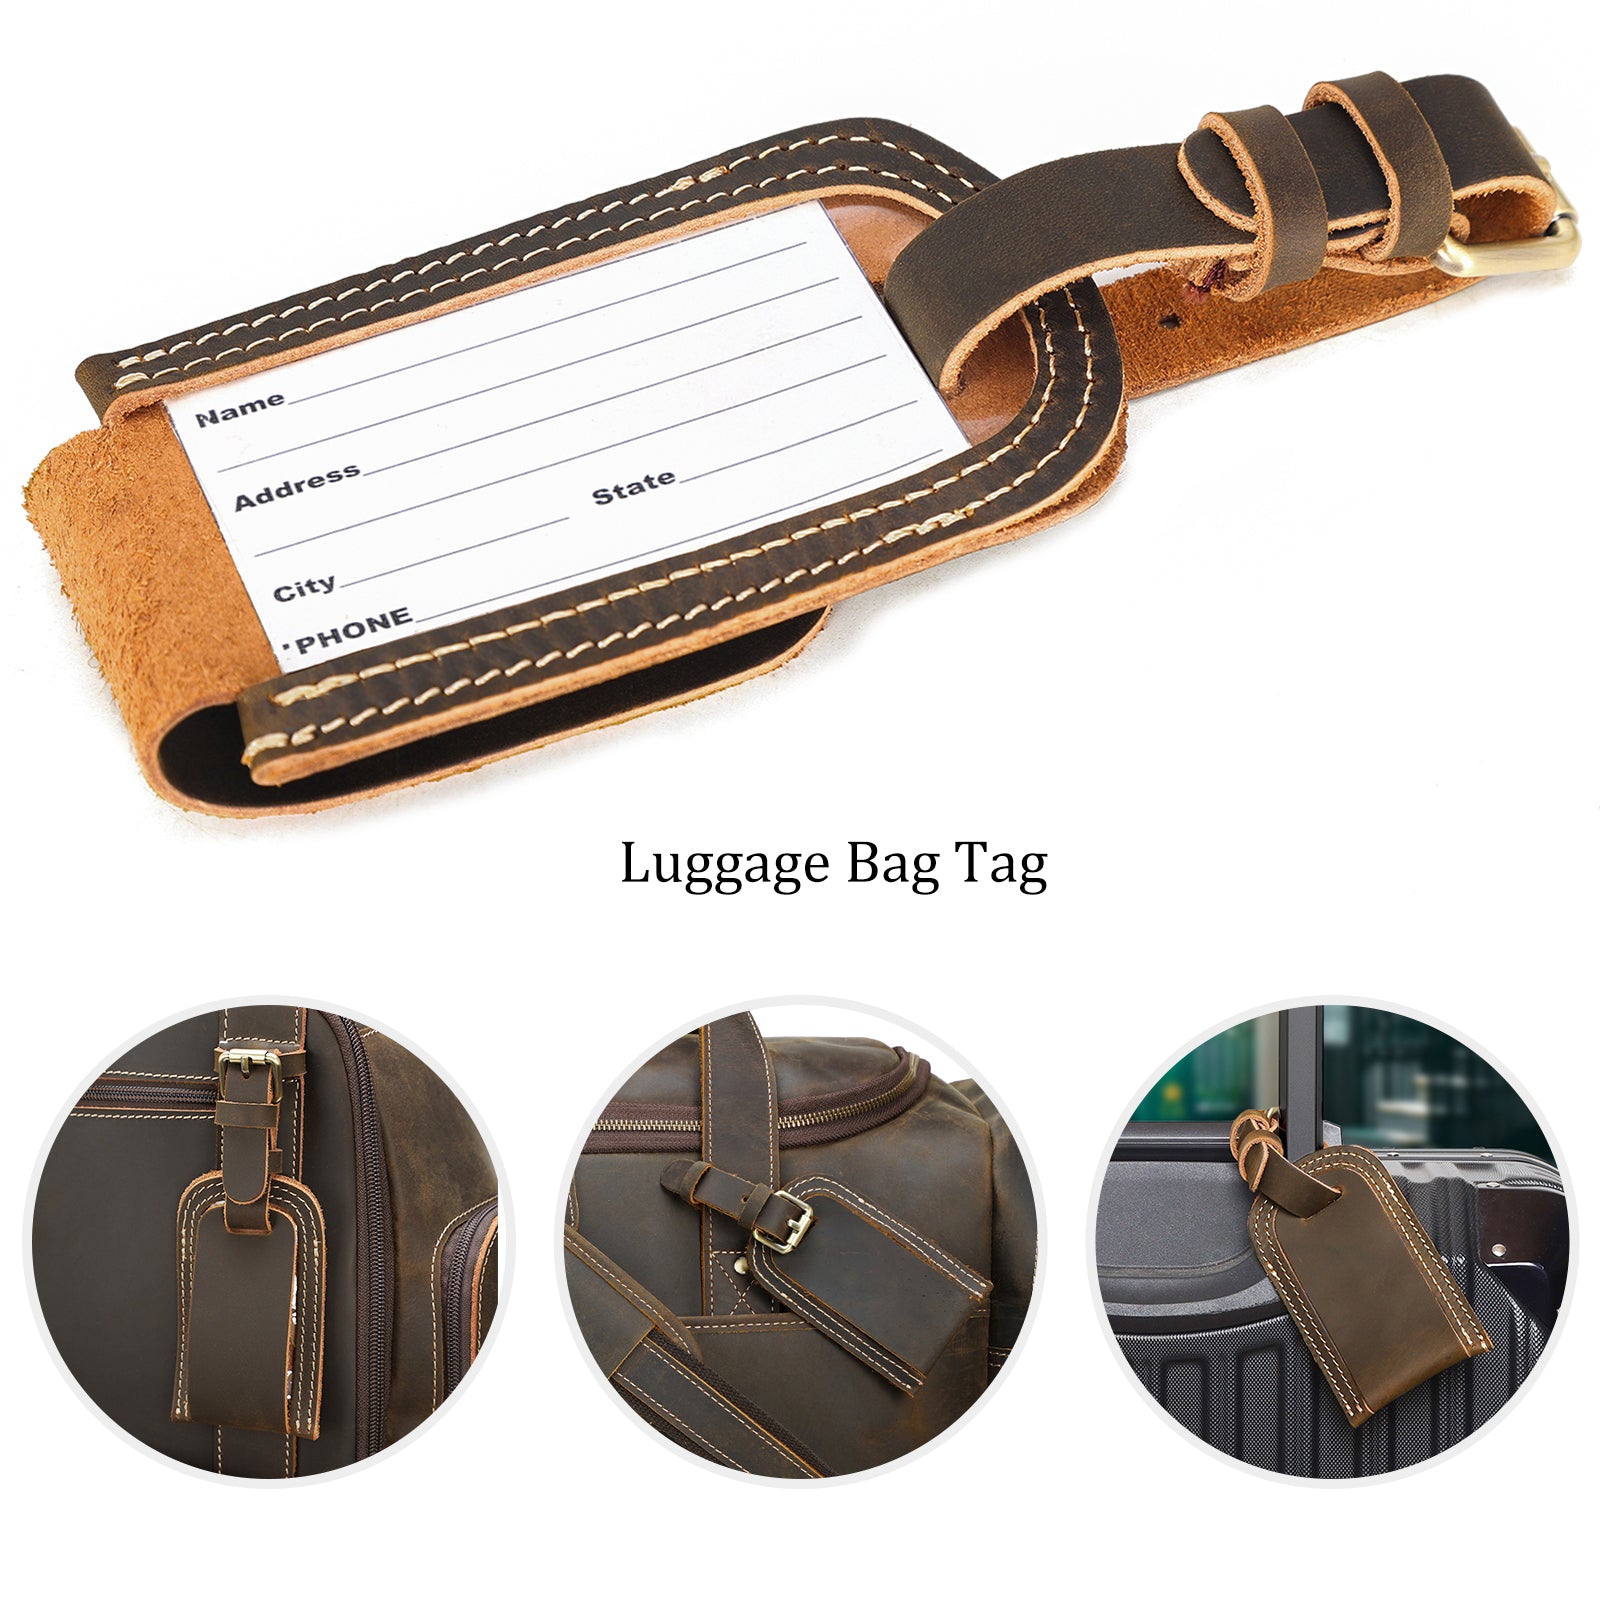 Polare Retro Feel Full Grain Leather Luggage Bag Tags for Suitcases Duffel Weekender Bag 1pc set